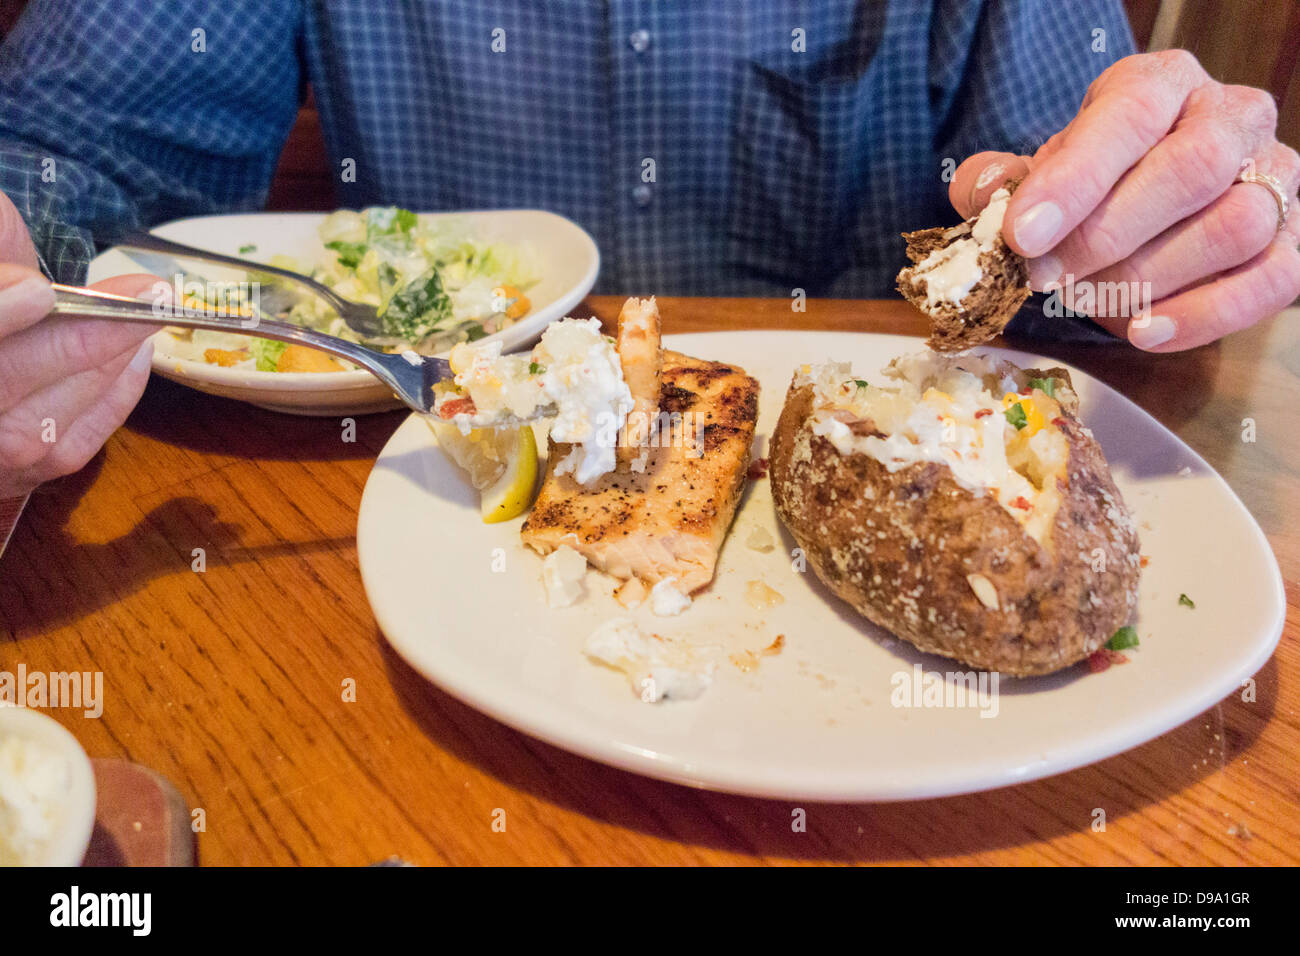 A senior man, chest and hands only, eats a meal of grilled salmon, baked potato, salad and bread at a restaurant. USA Stock Photo